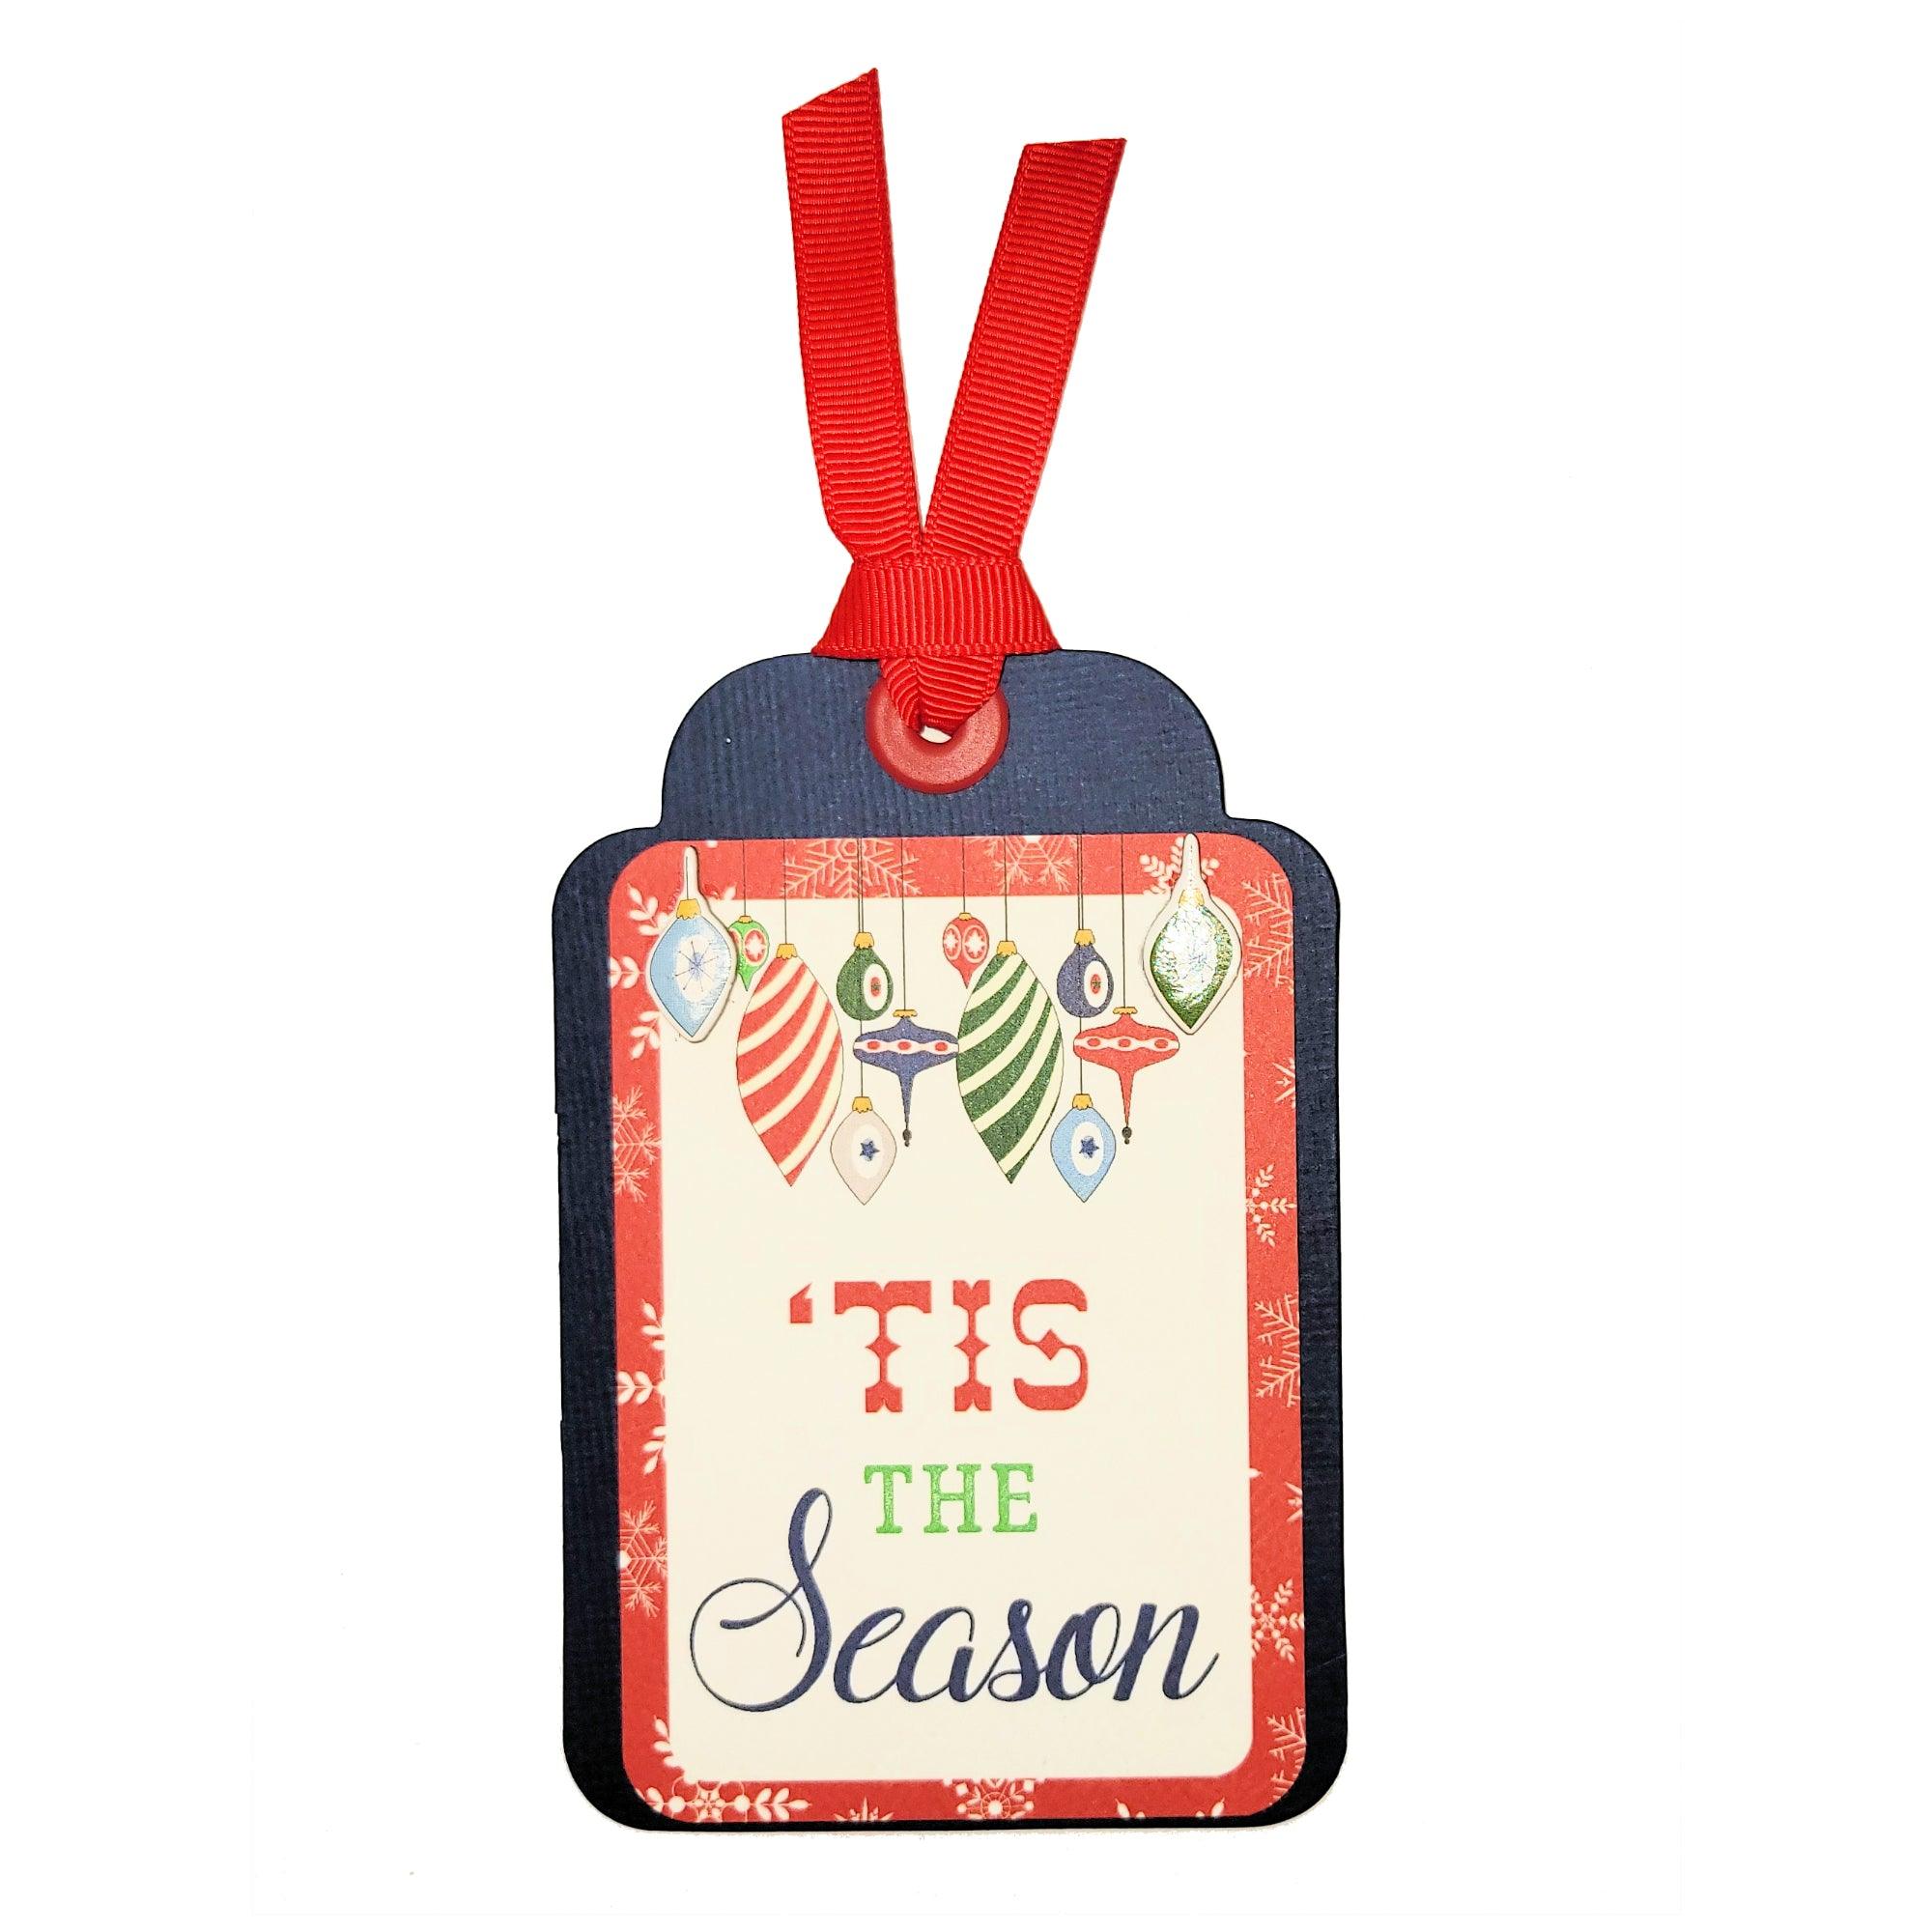 Christmas Collection Tis The Season Vintage Ornaments 3 x 4 Scrapbook Tag Embellishment by SSC Designs